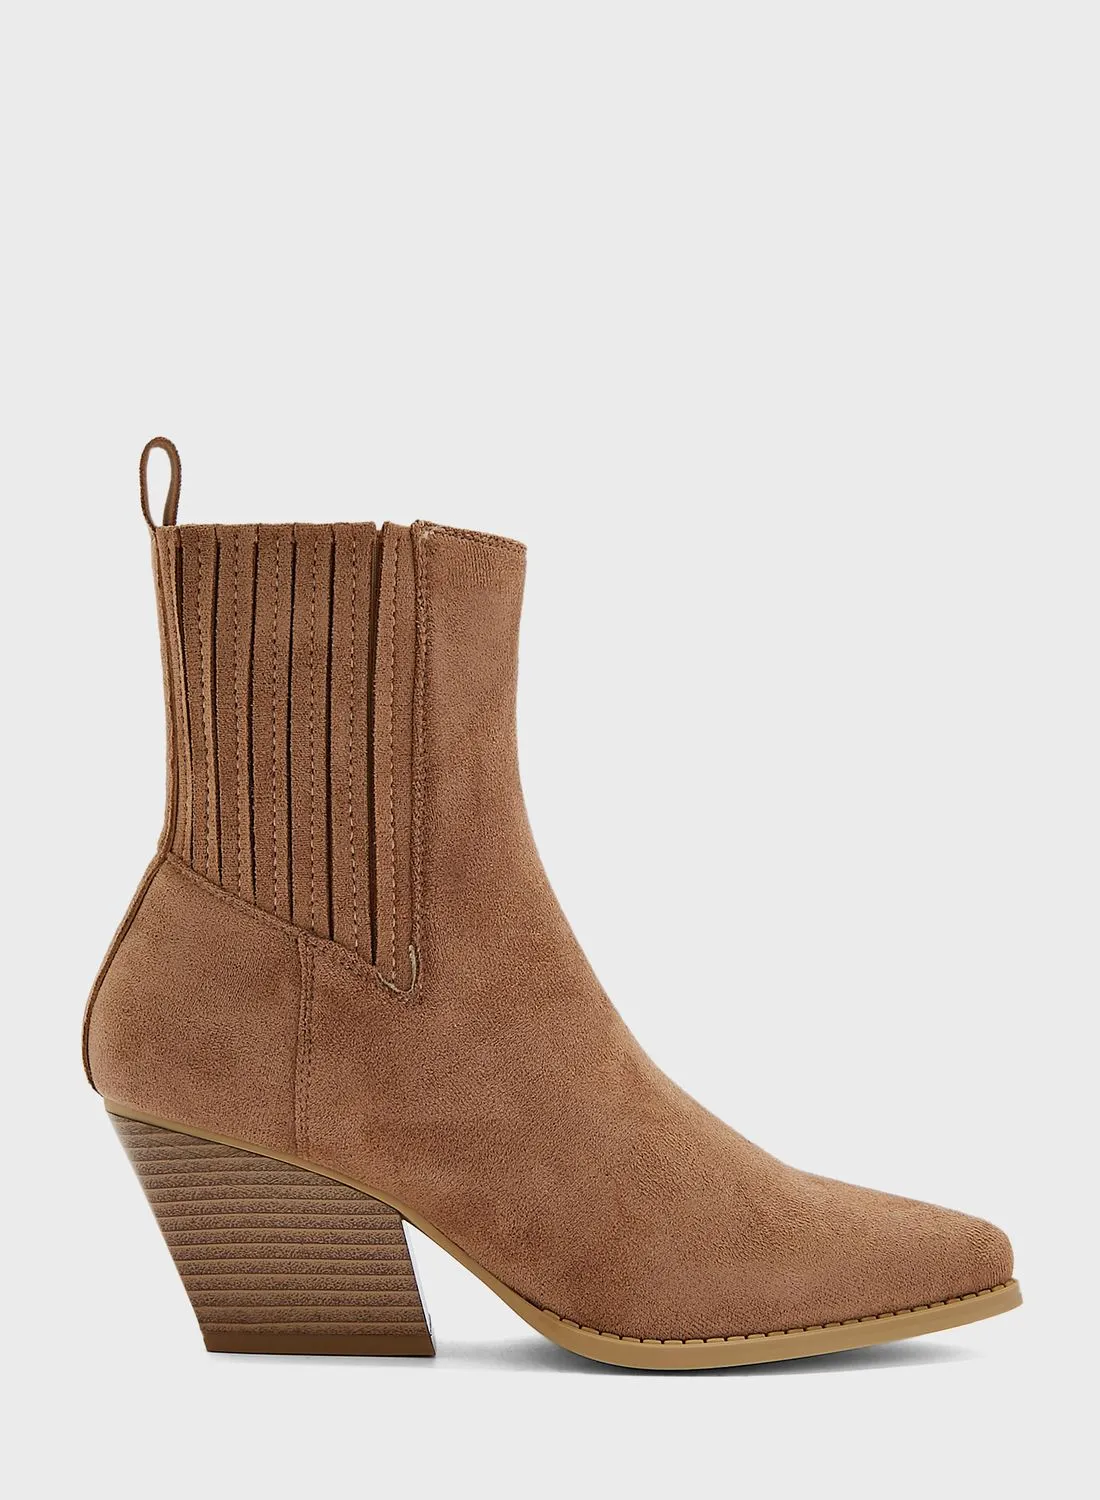 Truffle Cowboy Ankle Boots